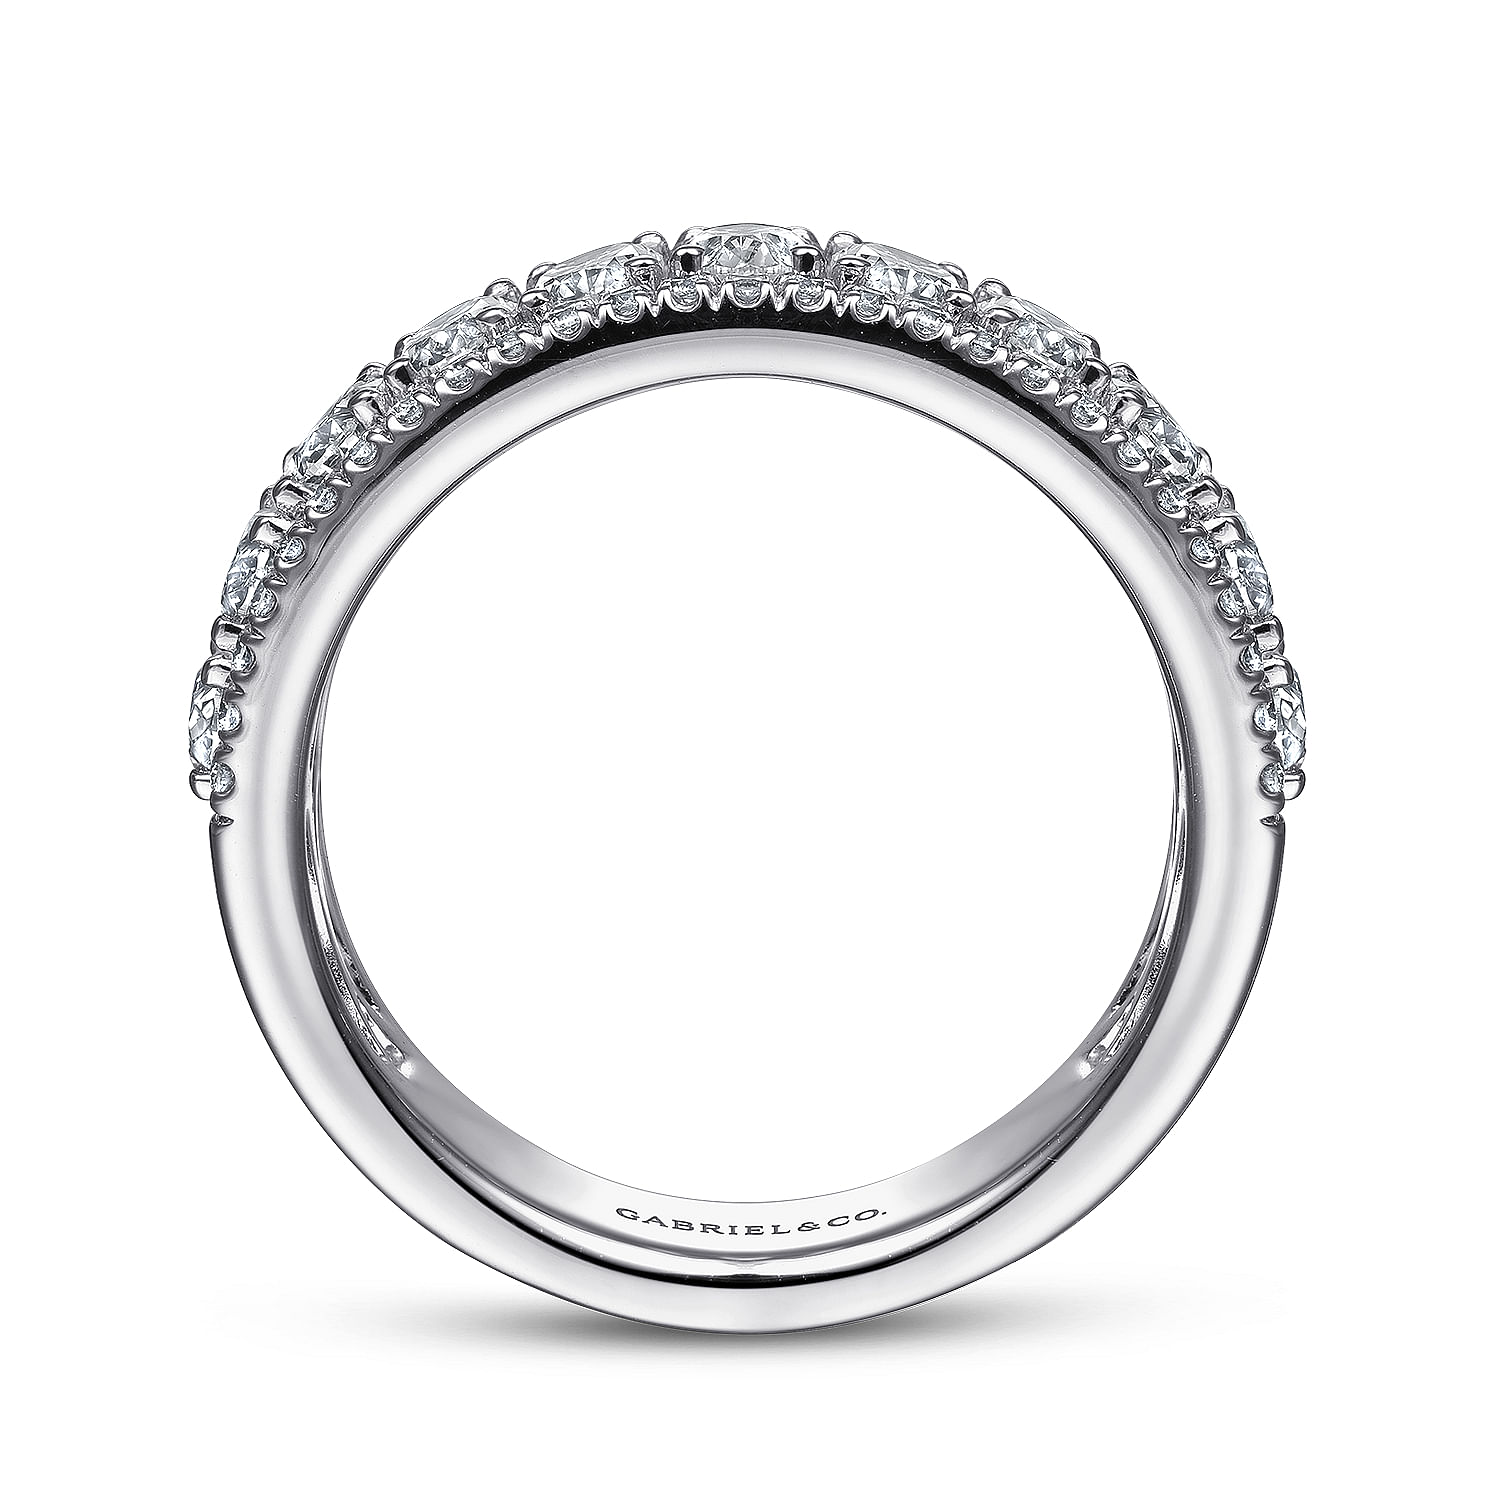 Wide 14K White Gold Oval and Round Diamond Anniversary Band